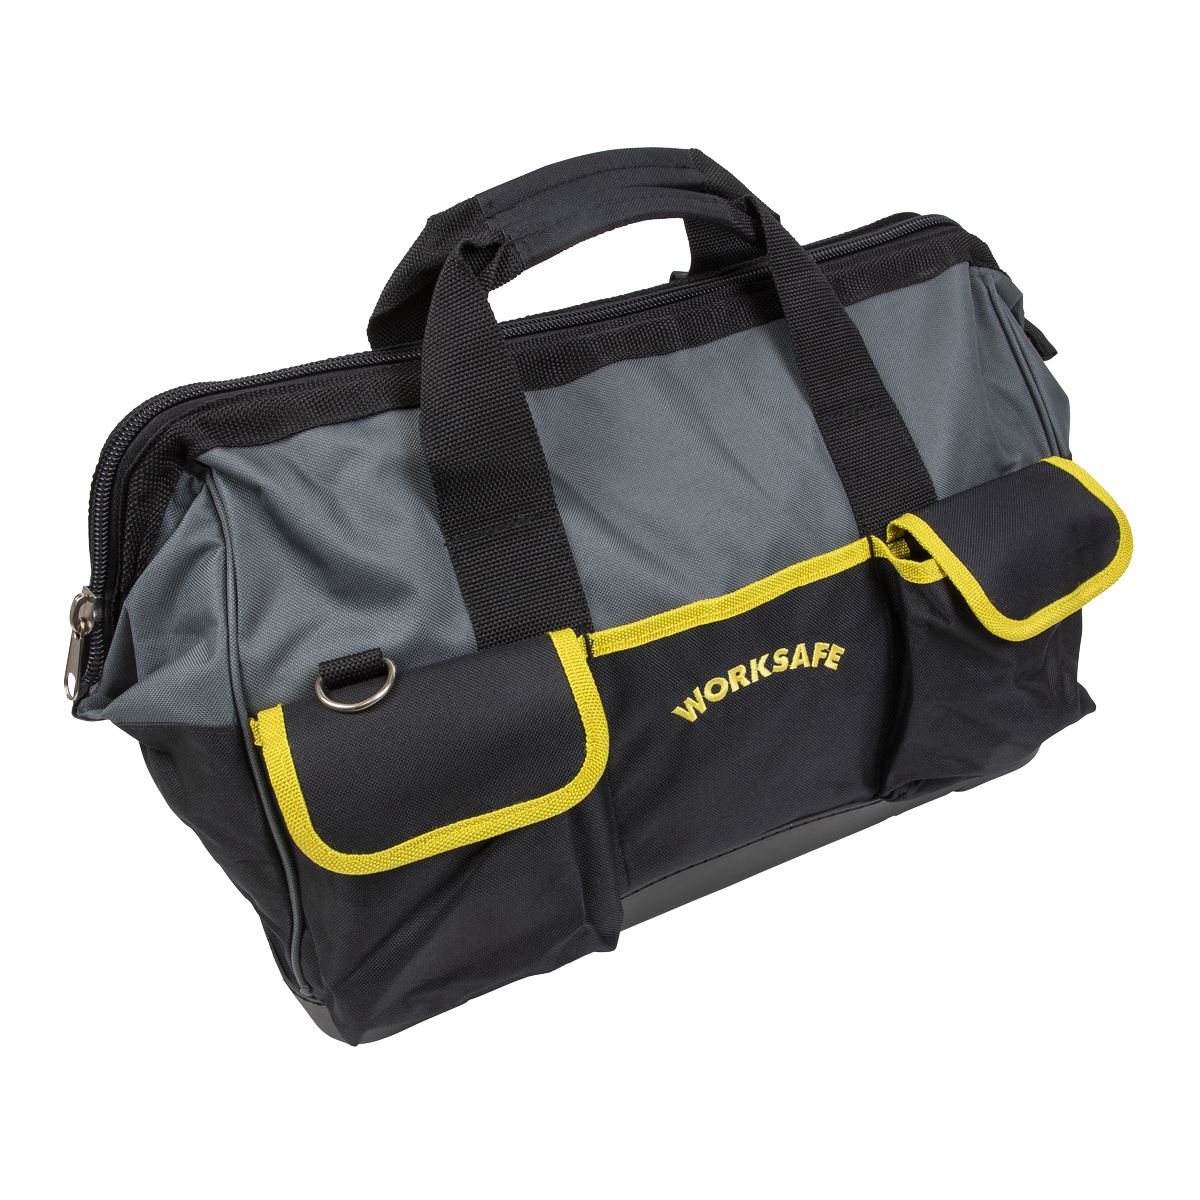 Worksafe by Sealey Toolbag Hard Base 440mm